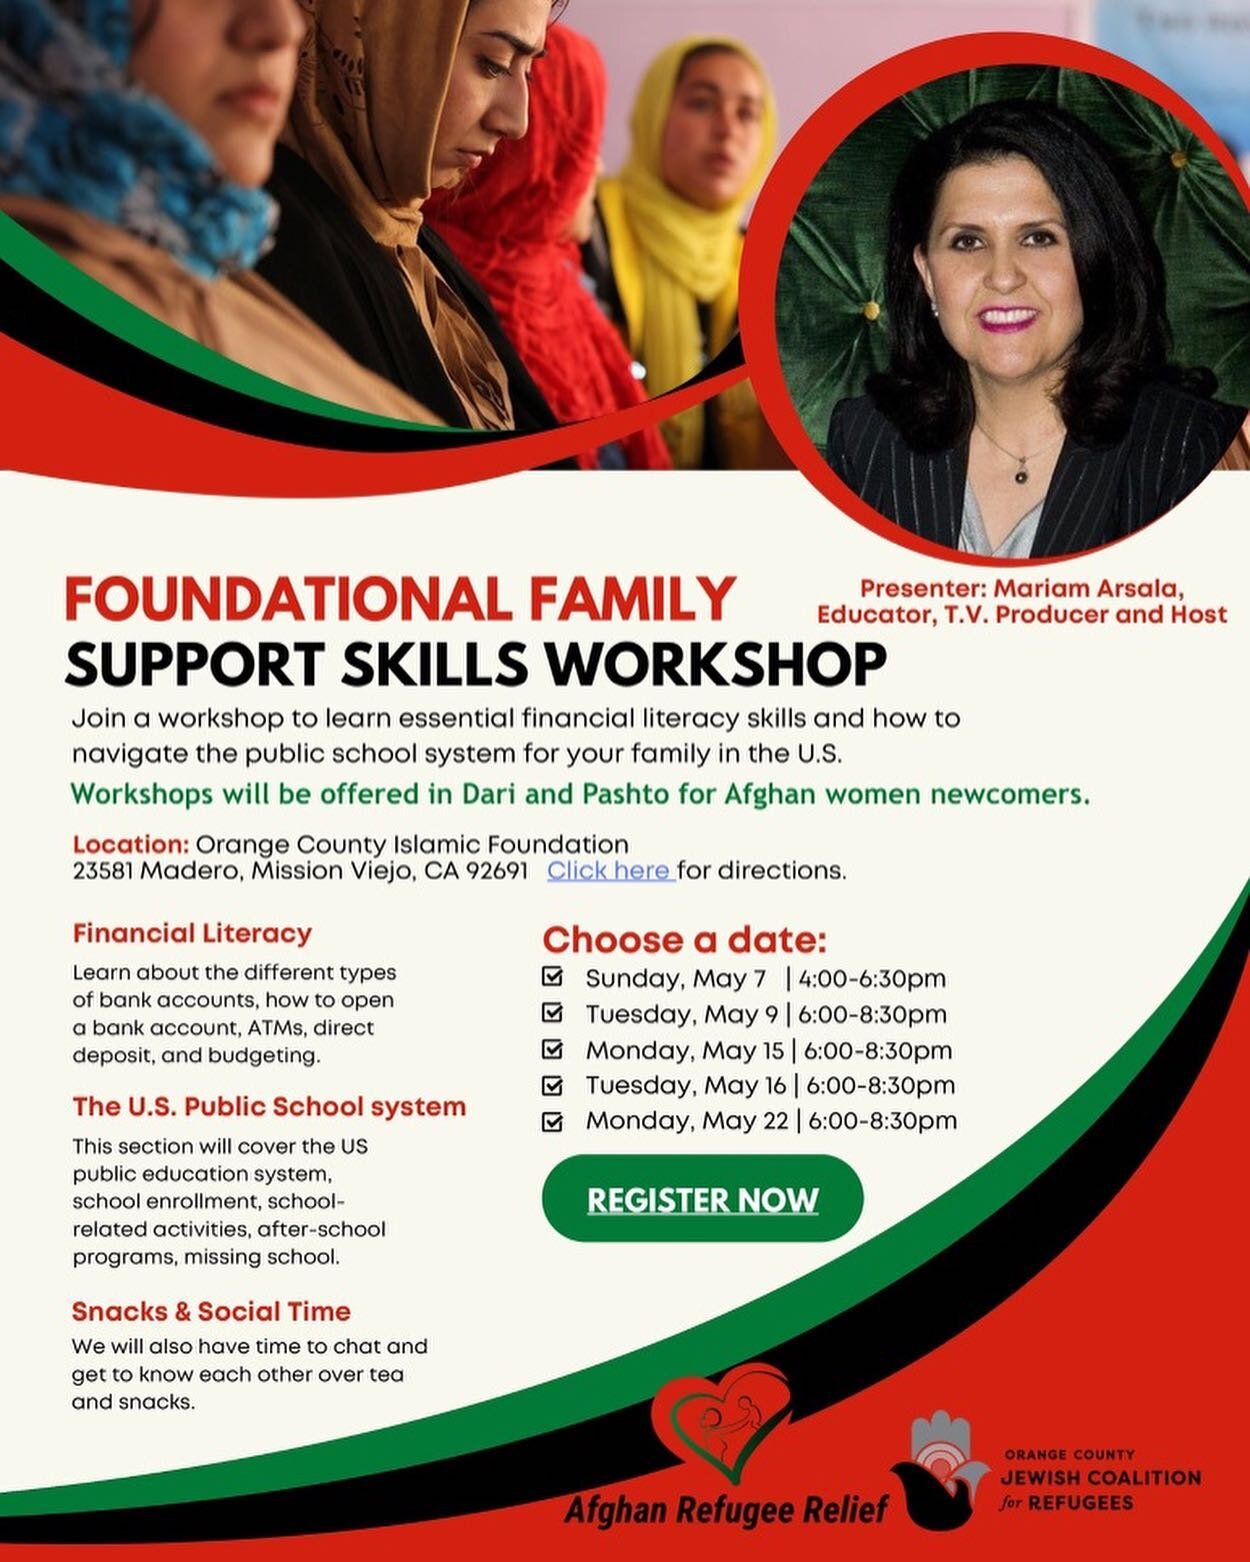 We are proud to partner with @ocjc4refugees and present Foundational Family Support Skills Workshops for Newly Arrived Afghan Women.

Emphasis will be on financial literacy and how to navigate the US public school system, presented by TV host, educat